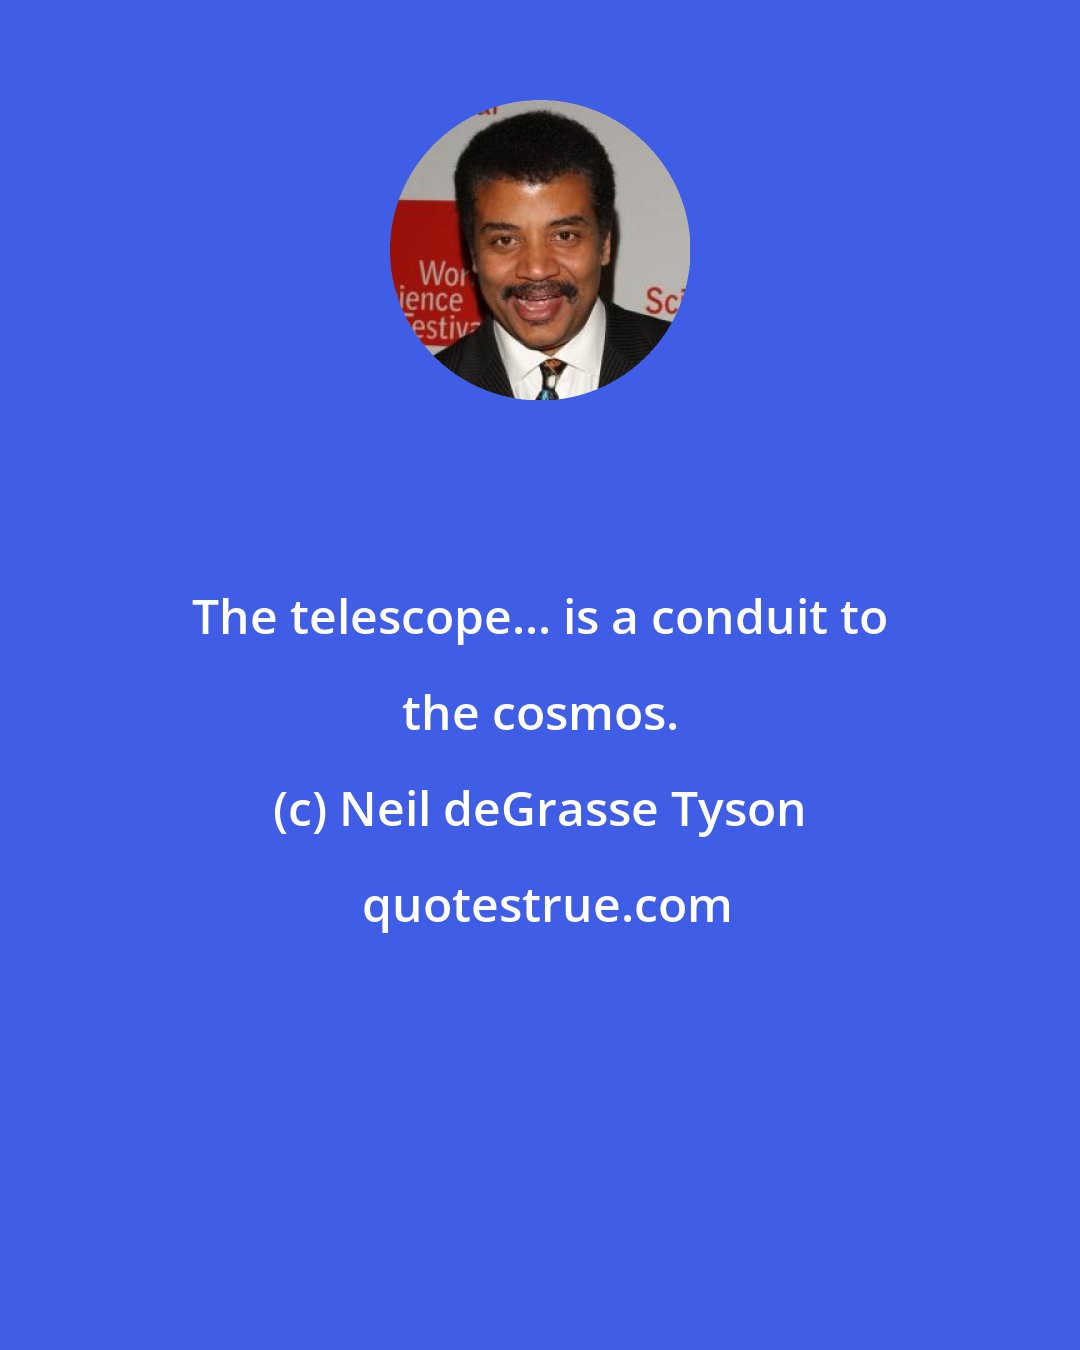 Neil deGrasse Tyson: The telescope... is a conduit to the cosmos.